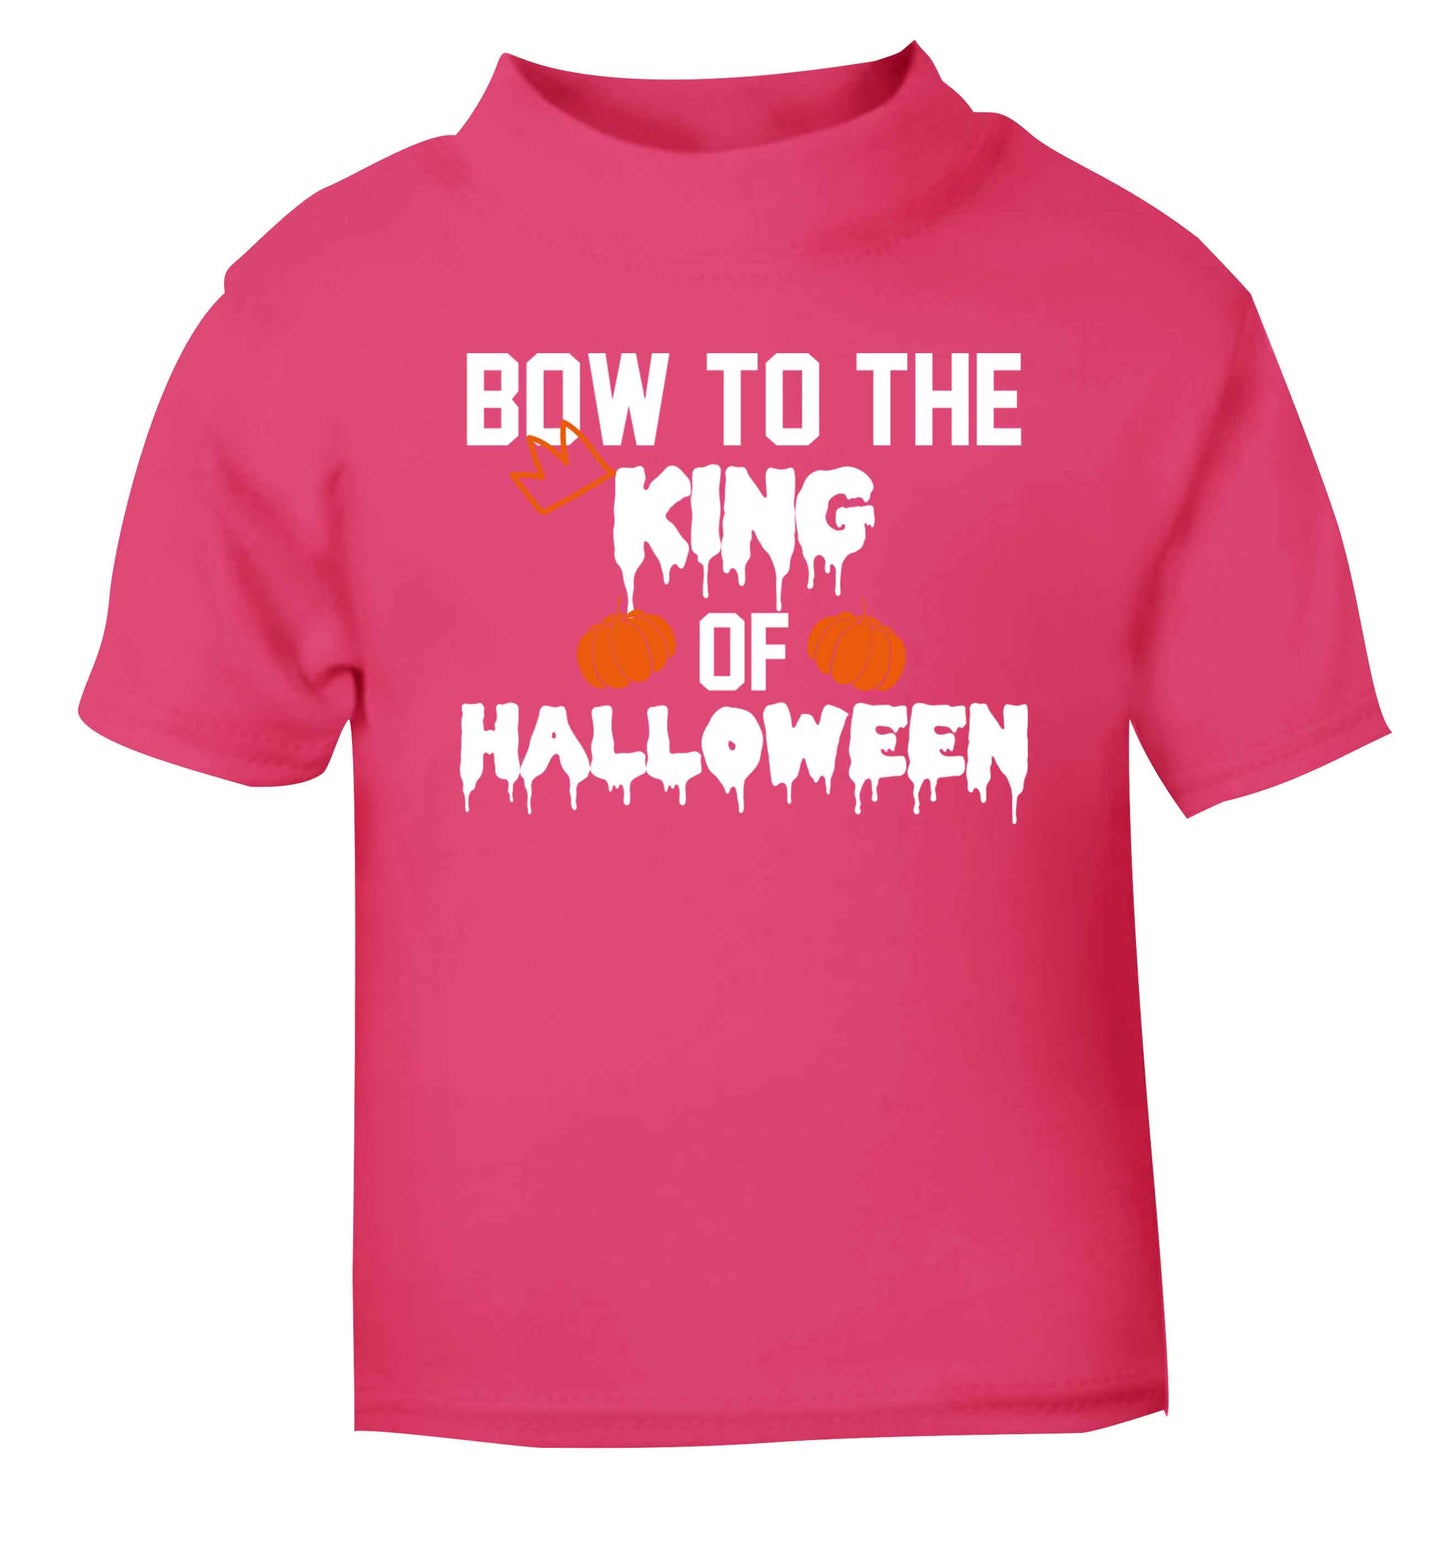 Bow to the King of halloween pink baby toddler Tshirt 2 Years